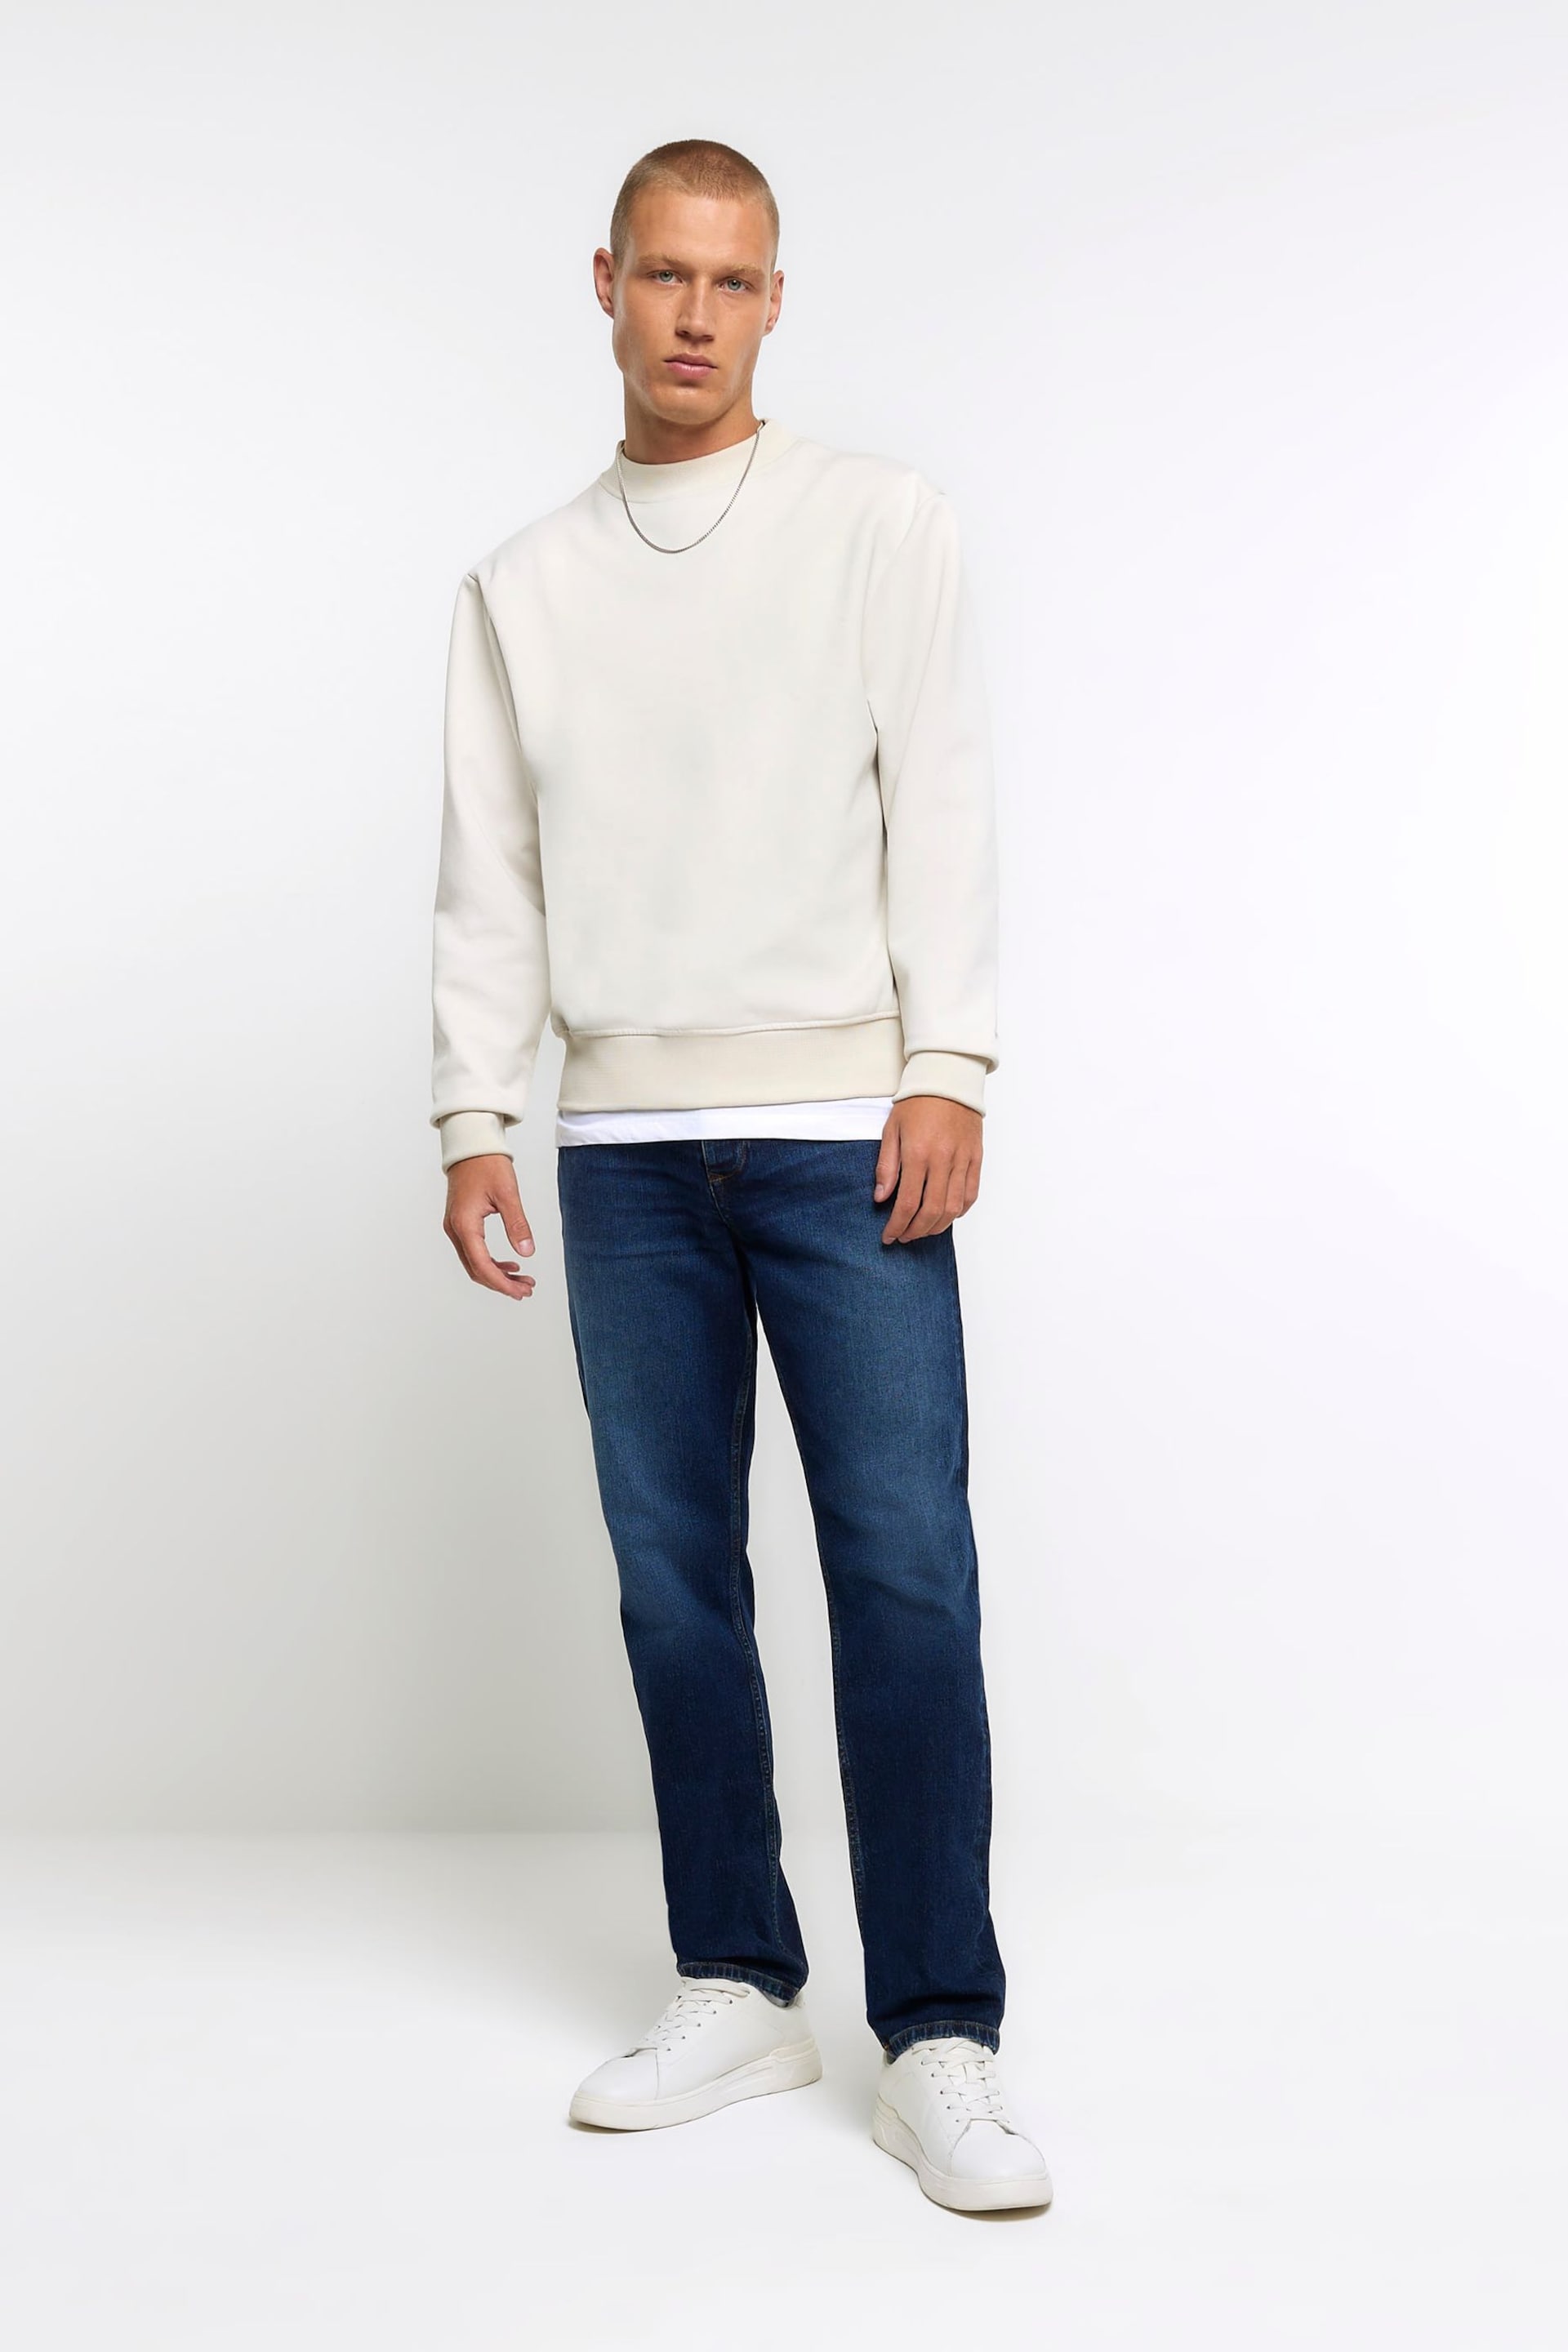 River Island Blue Slim Fit Jeans - Image 1 of 3